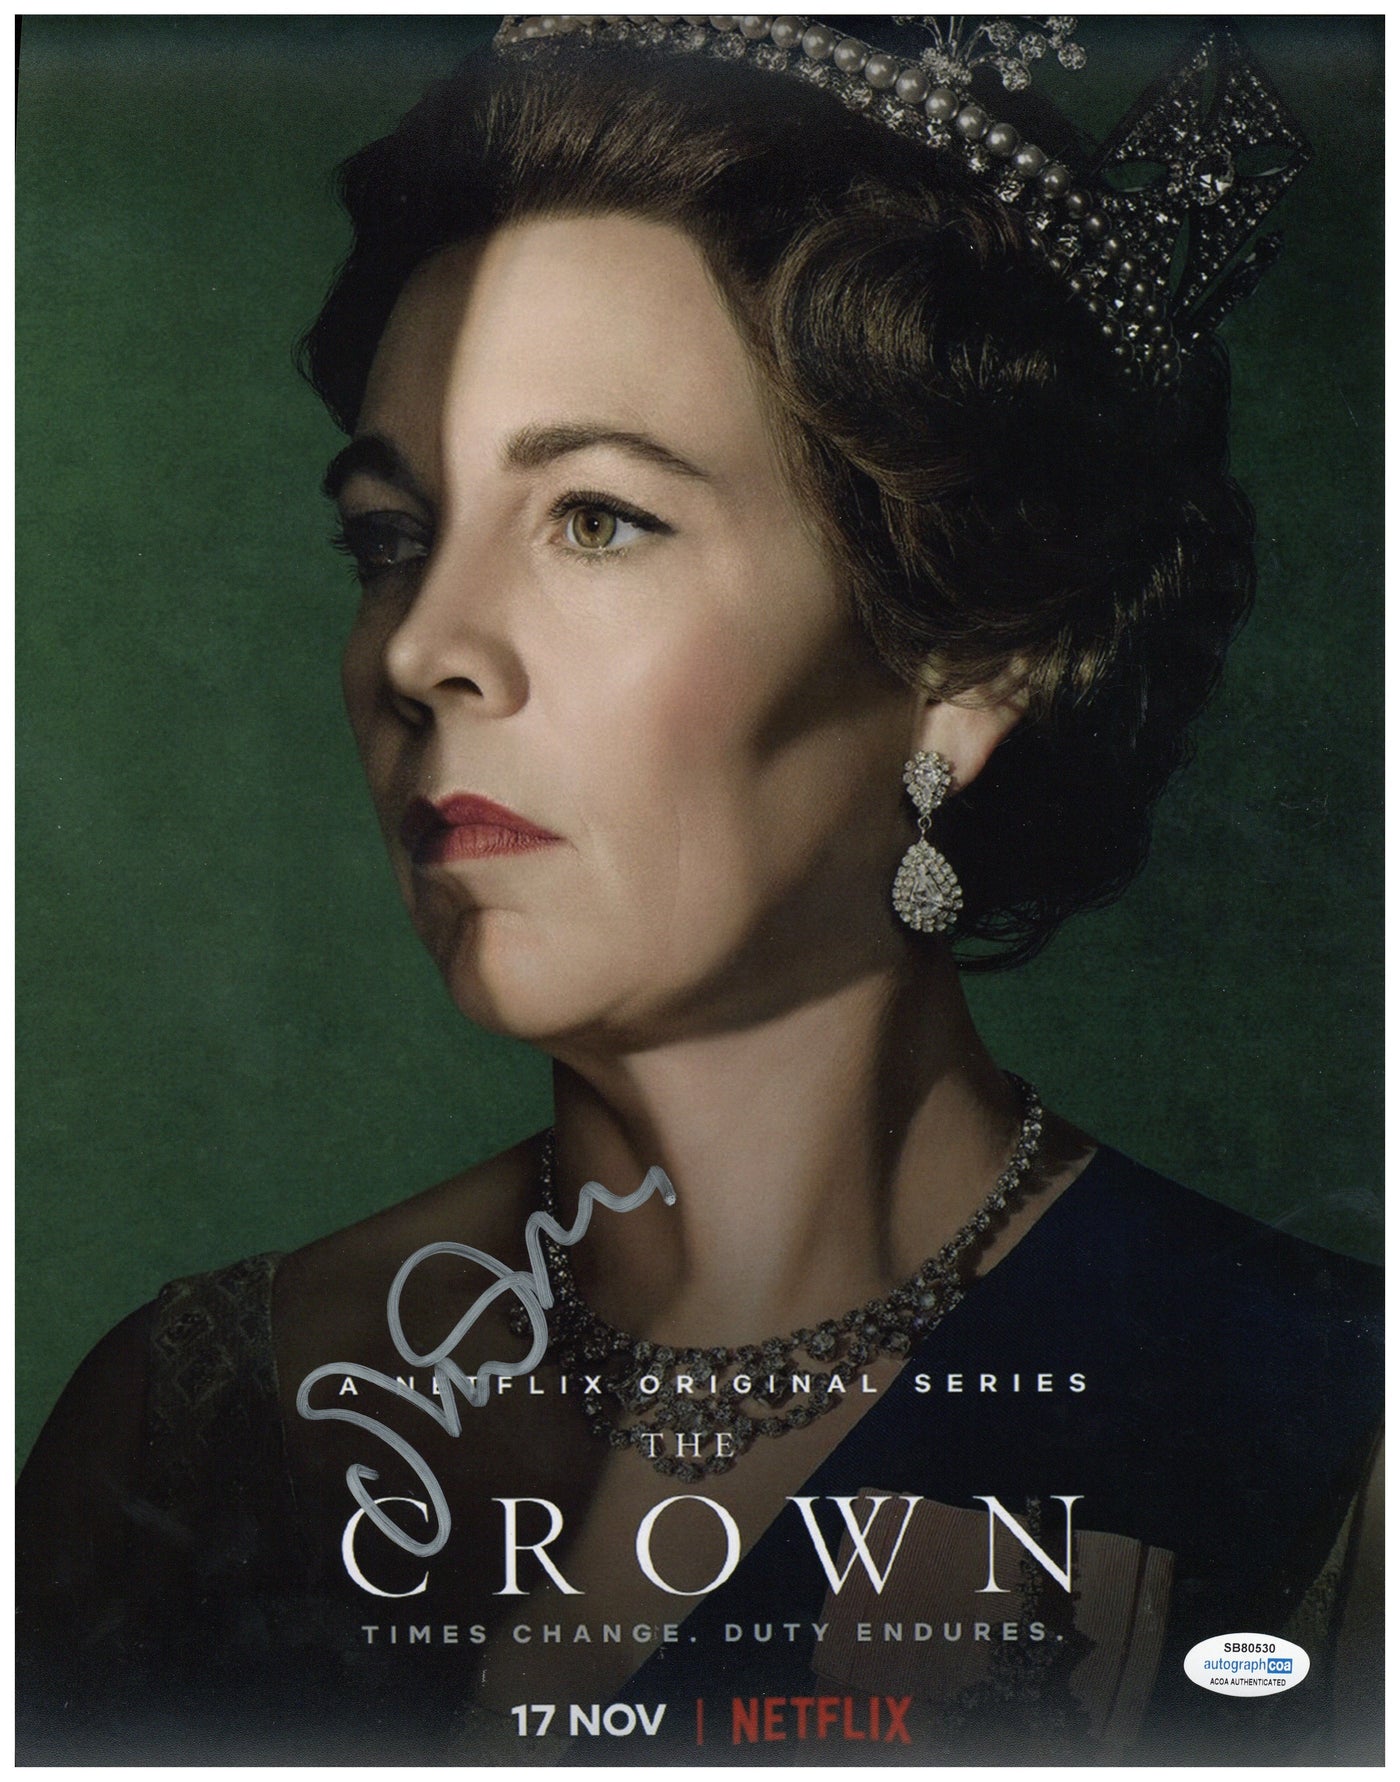 Olivia Colman Signed 11x14 Photo The Crown Autographed ACOA